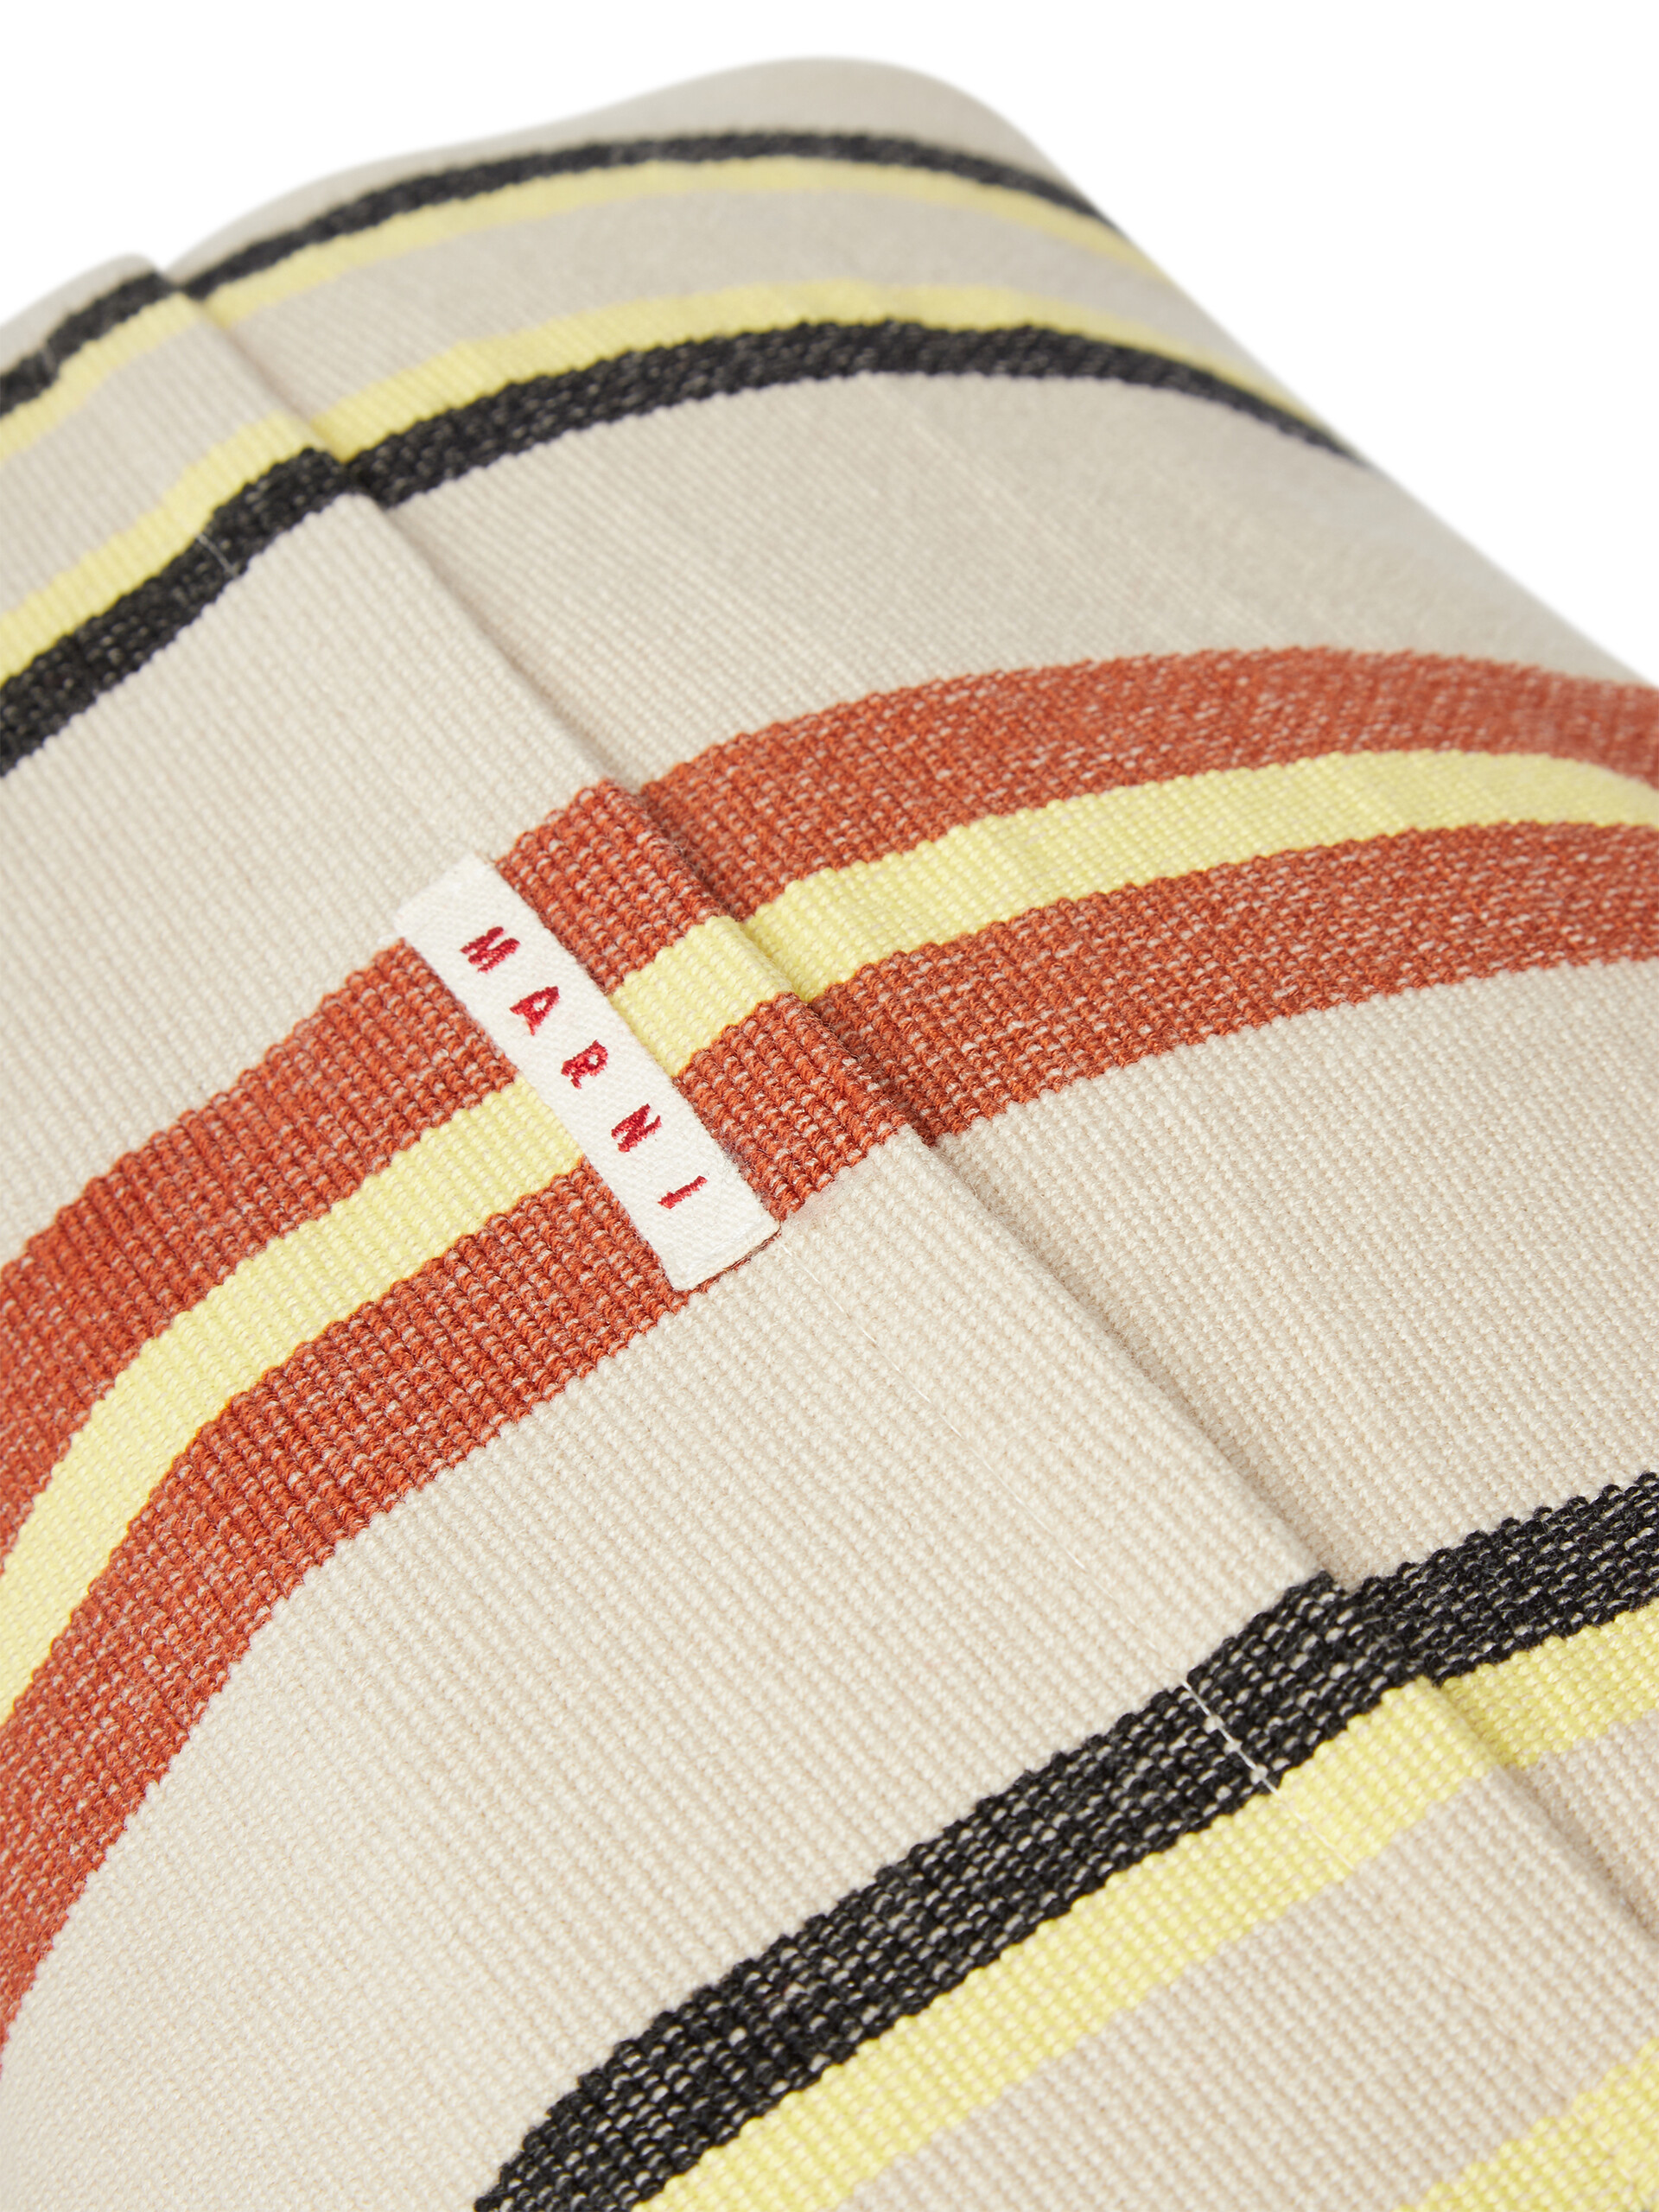 MARNI MARKET rectangular pillow cover in polyester with beige yellow and black vertical stripes - Furniture - Image 3